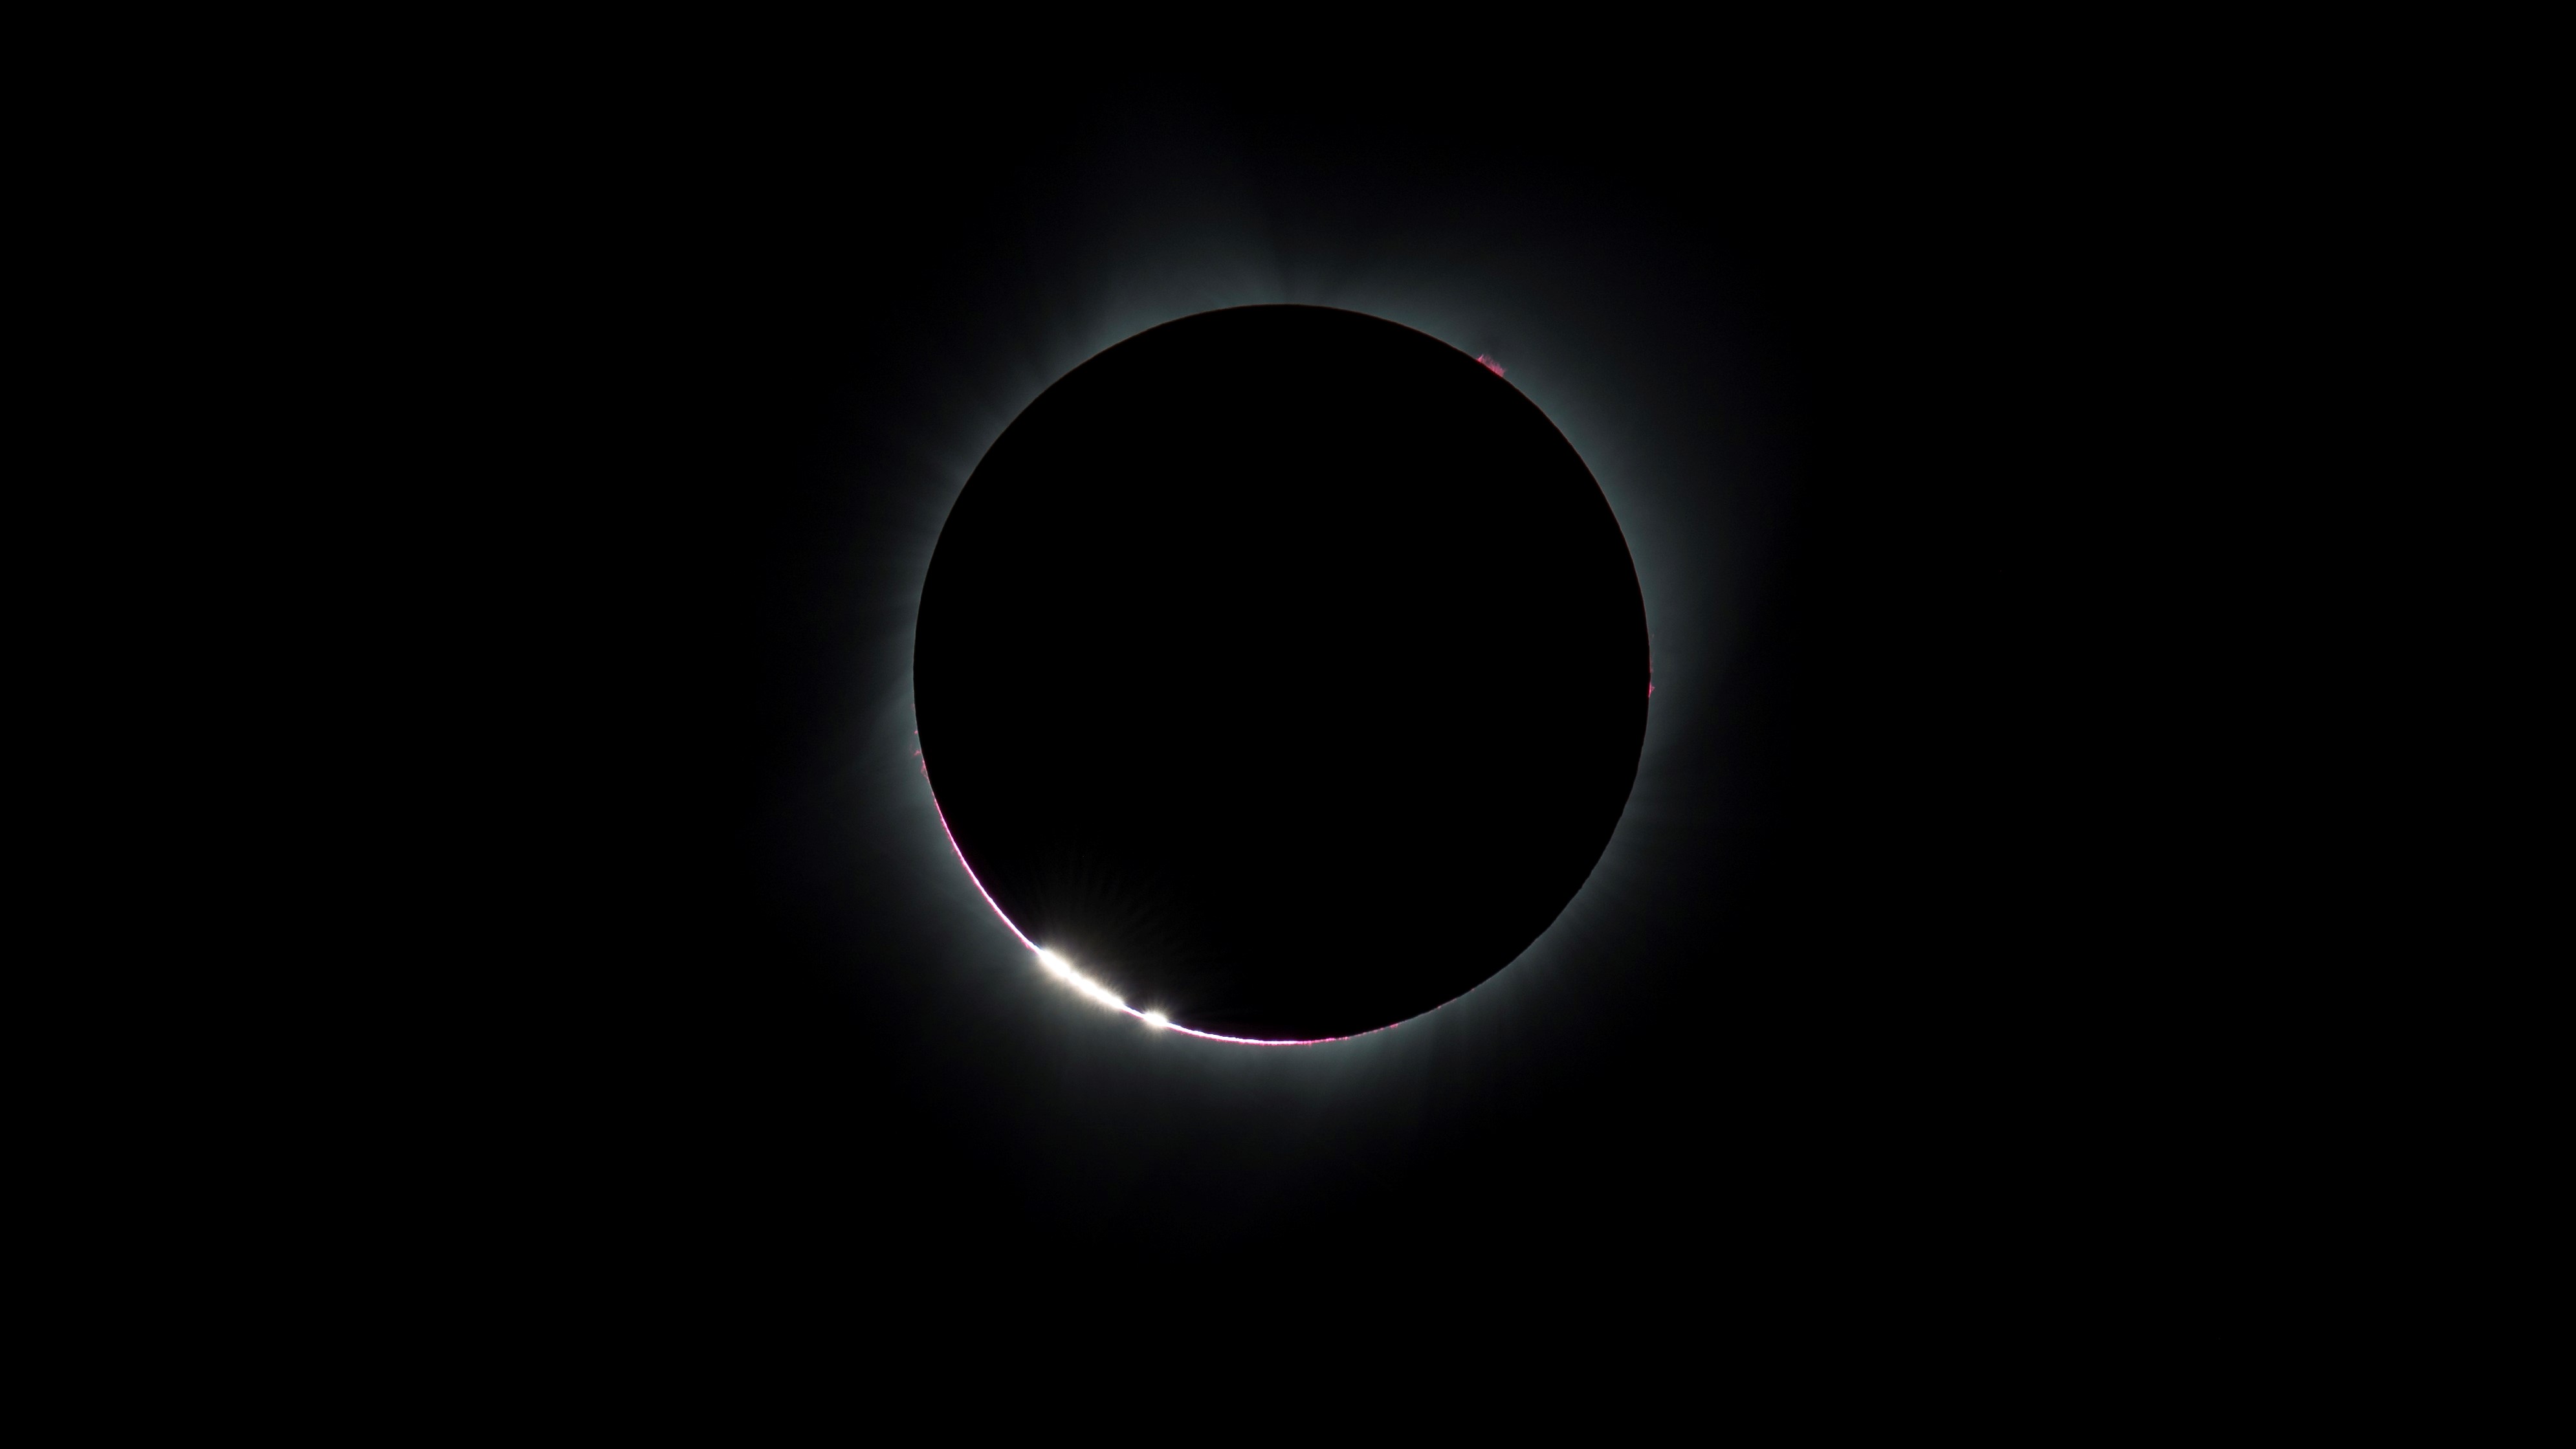 Bright beads of light are produced around the very edge of a solar eclipse just before totality.